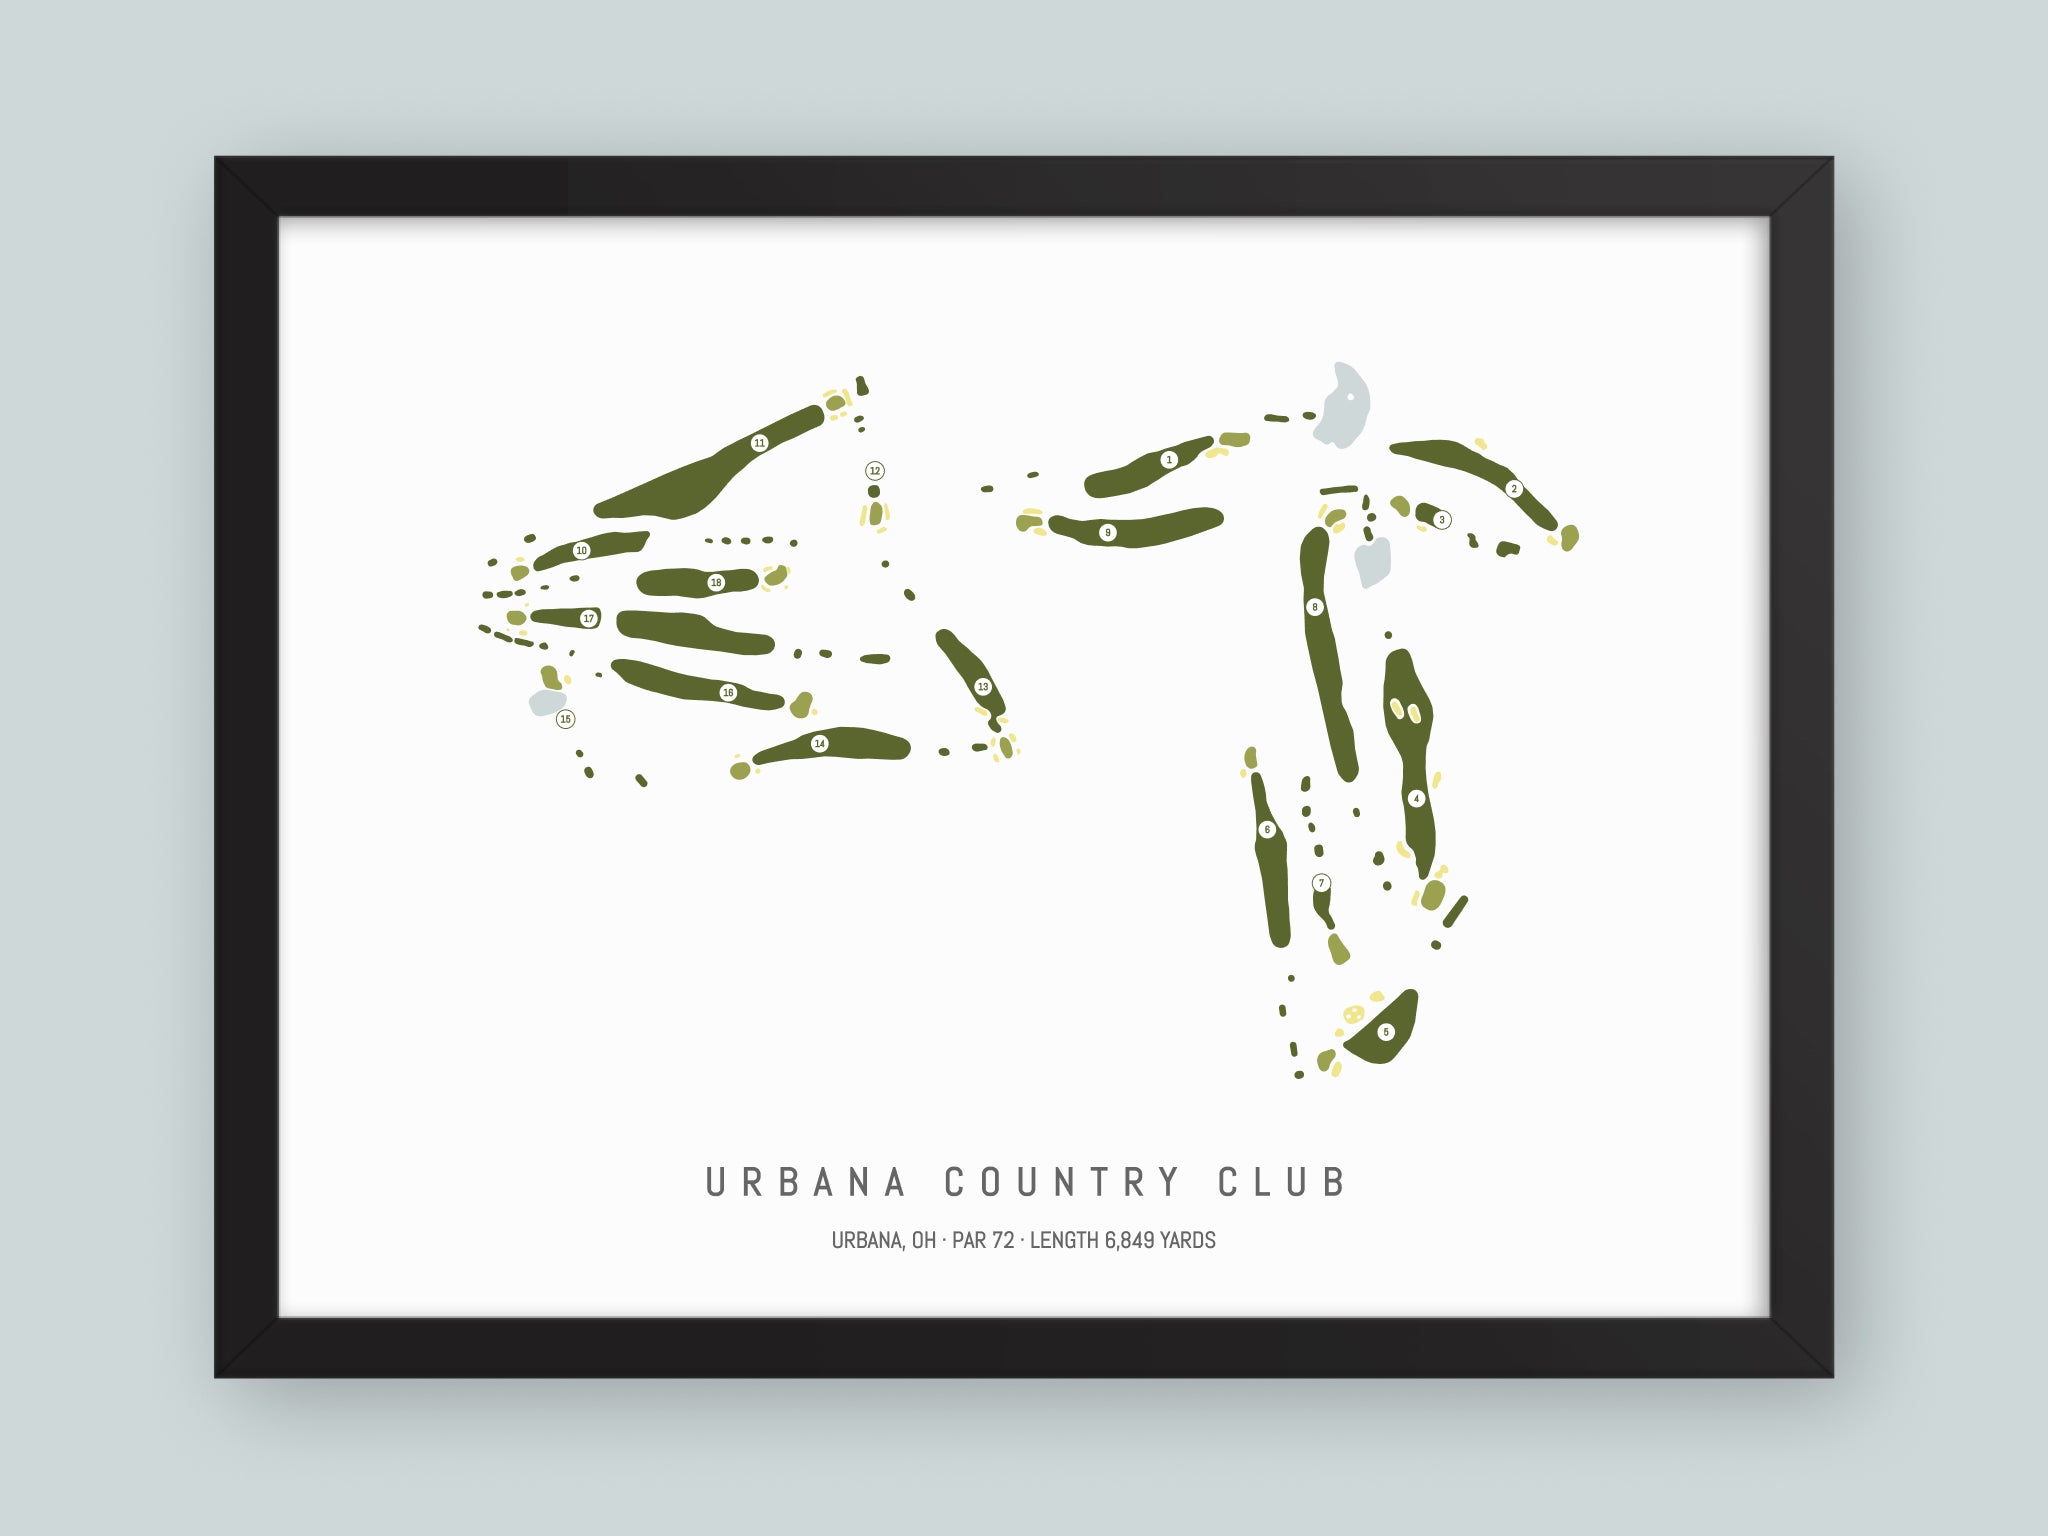 Urbana-Country-Club-OH--Black-Frame-24x18-With-Hole-Numbers